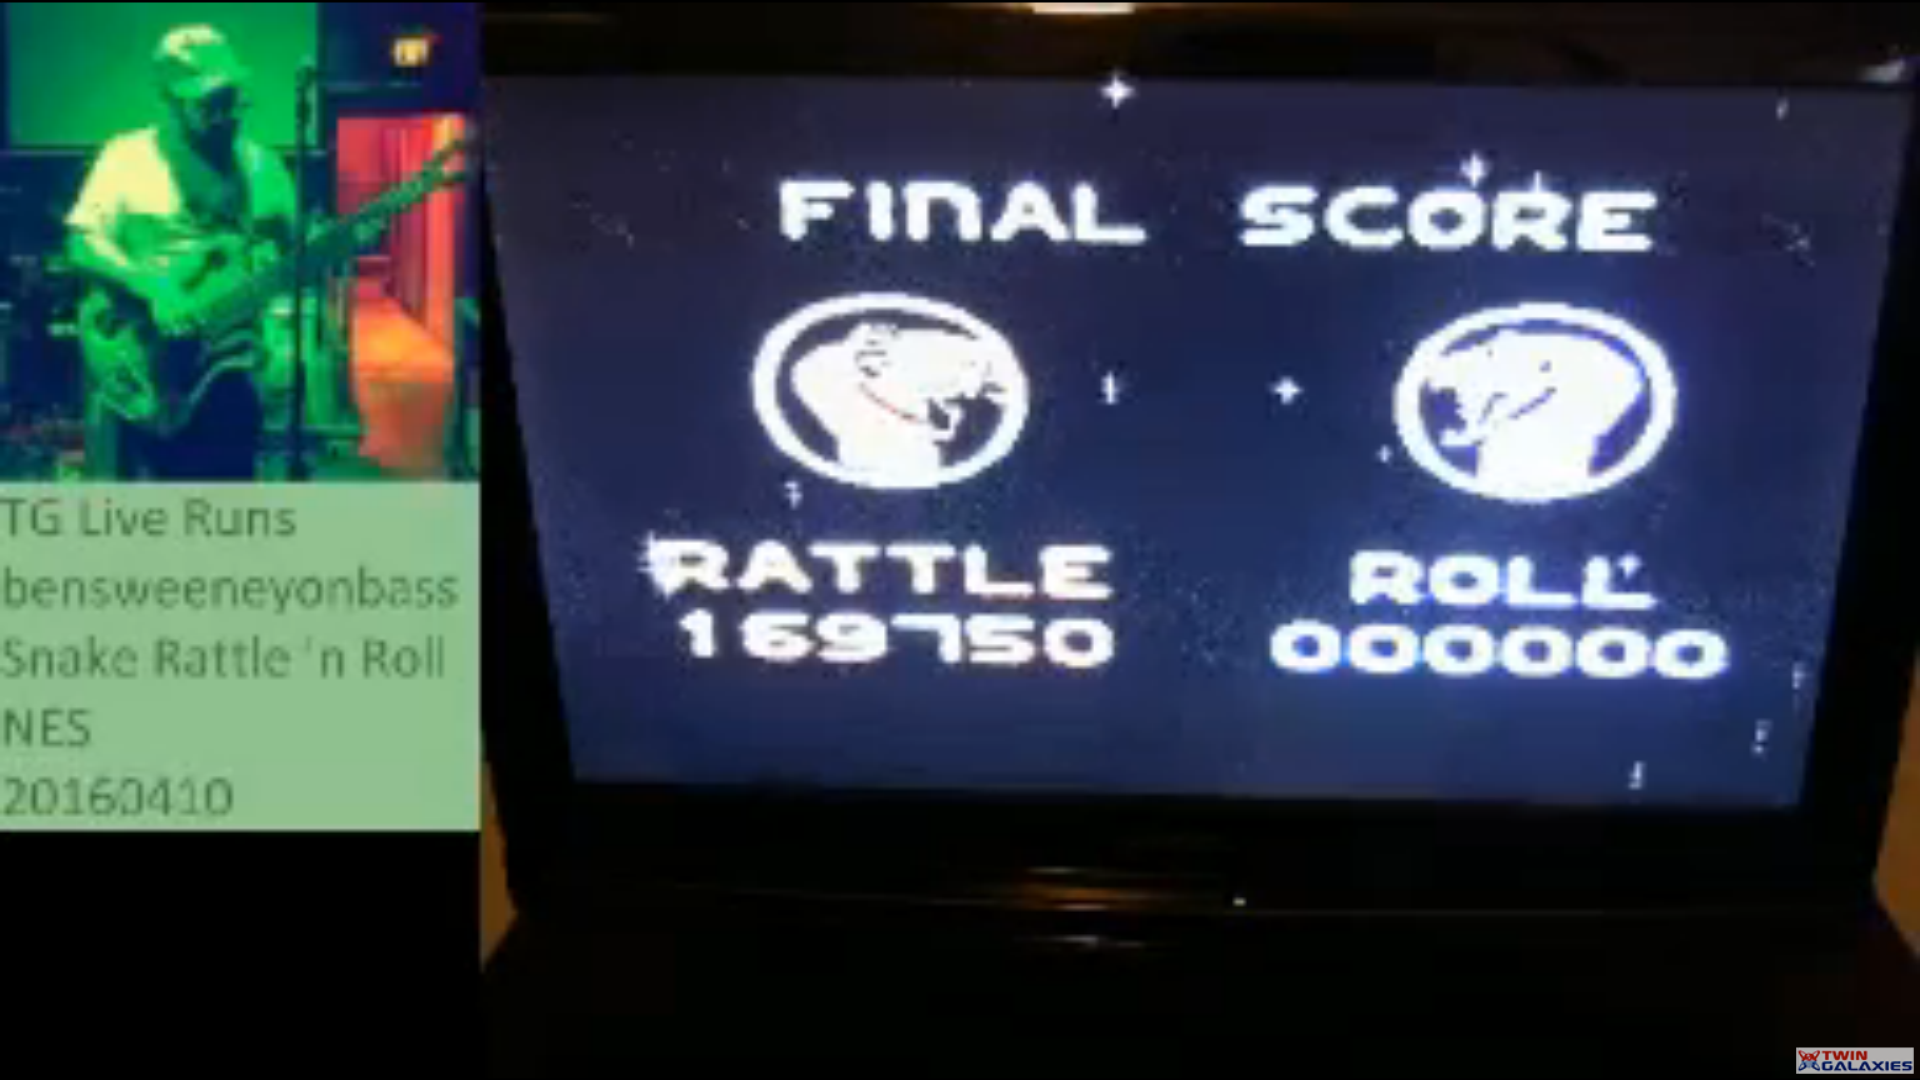 Snake Rattle N Roll 169,750 points